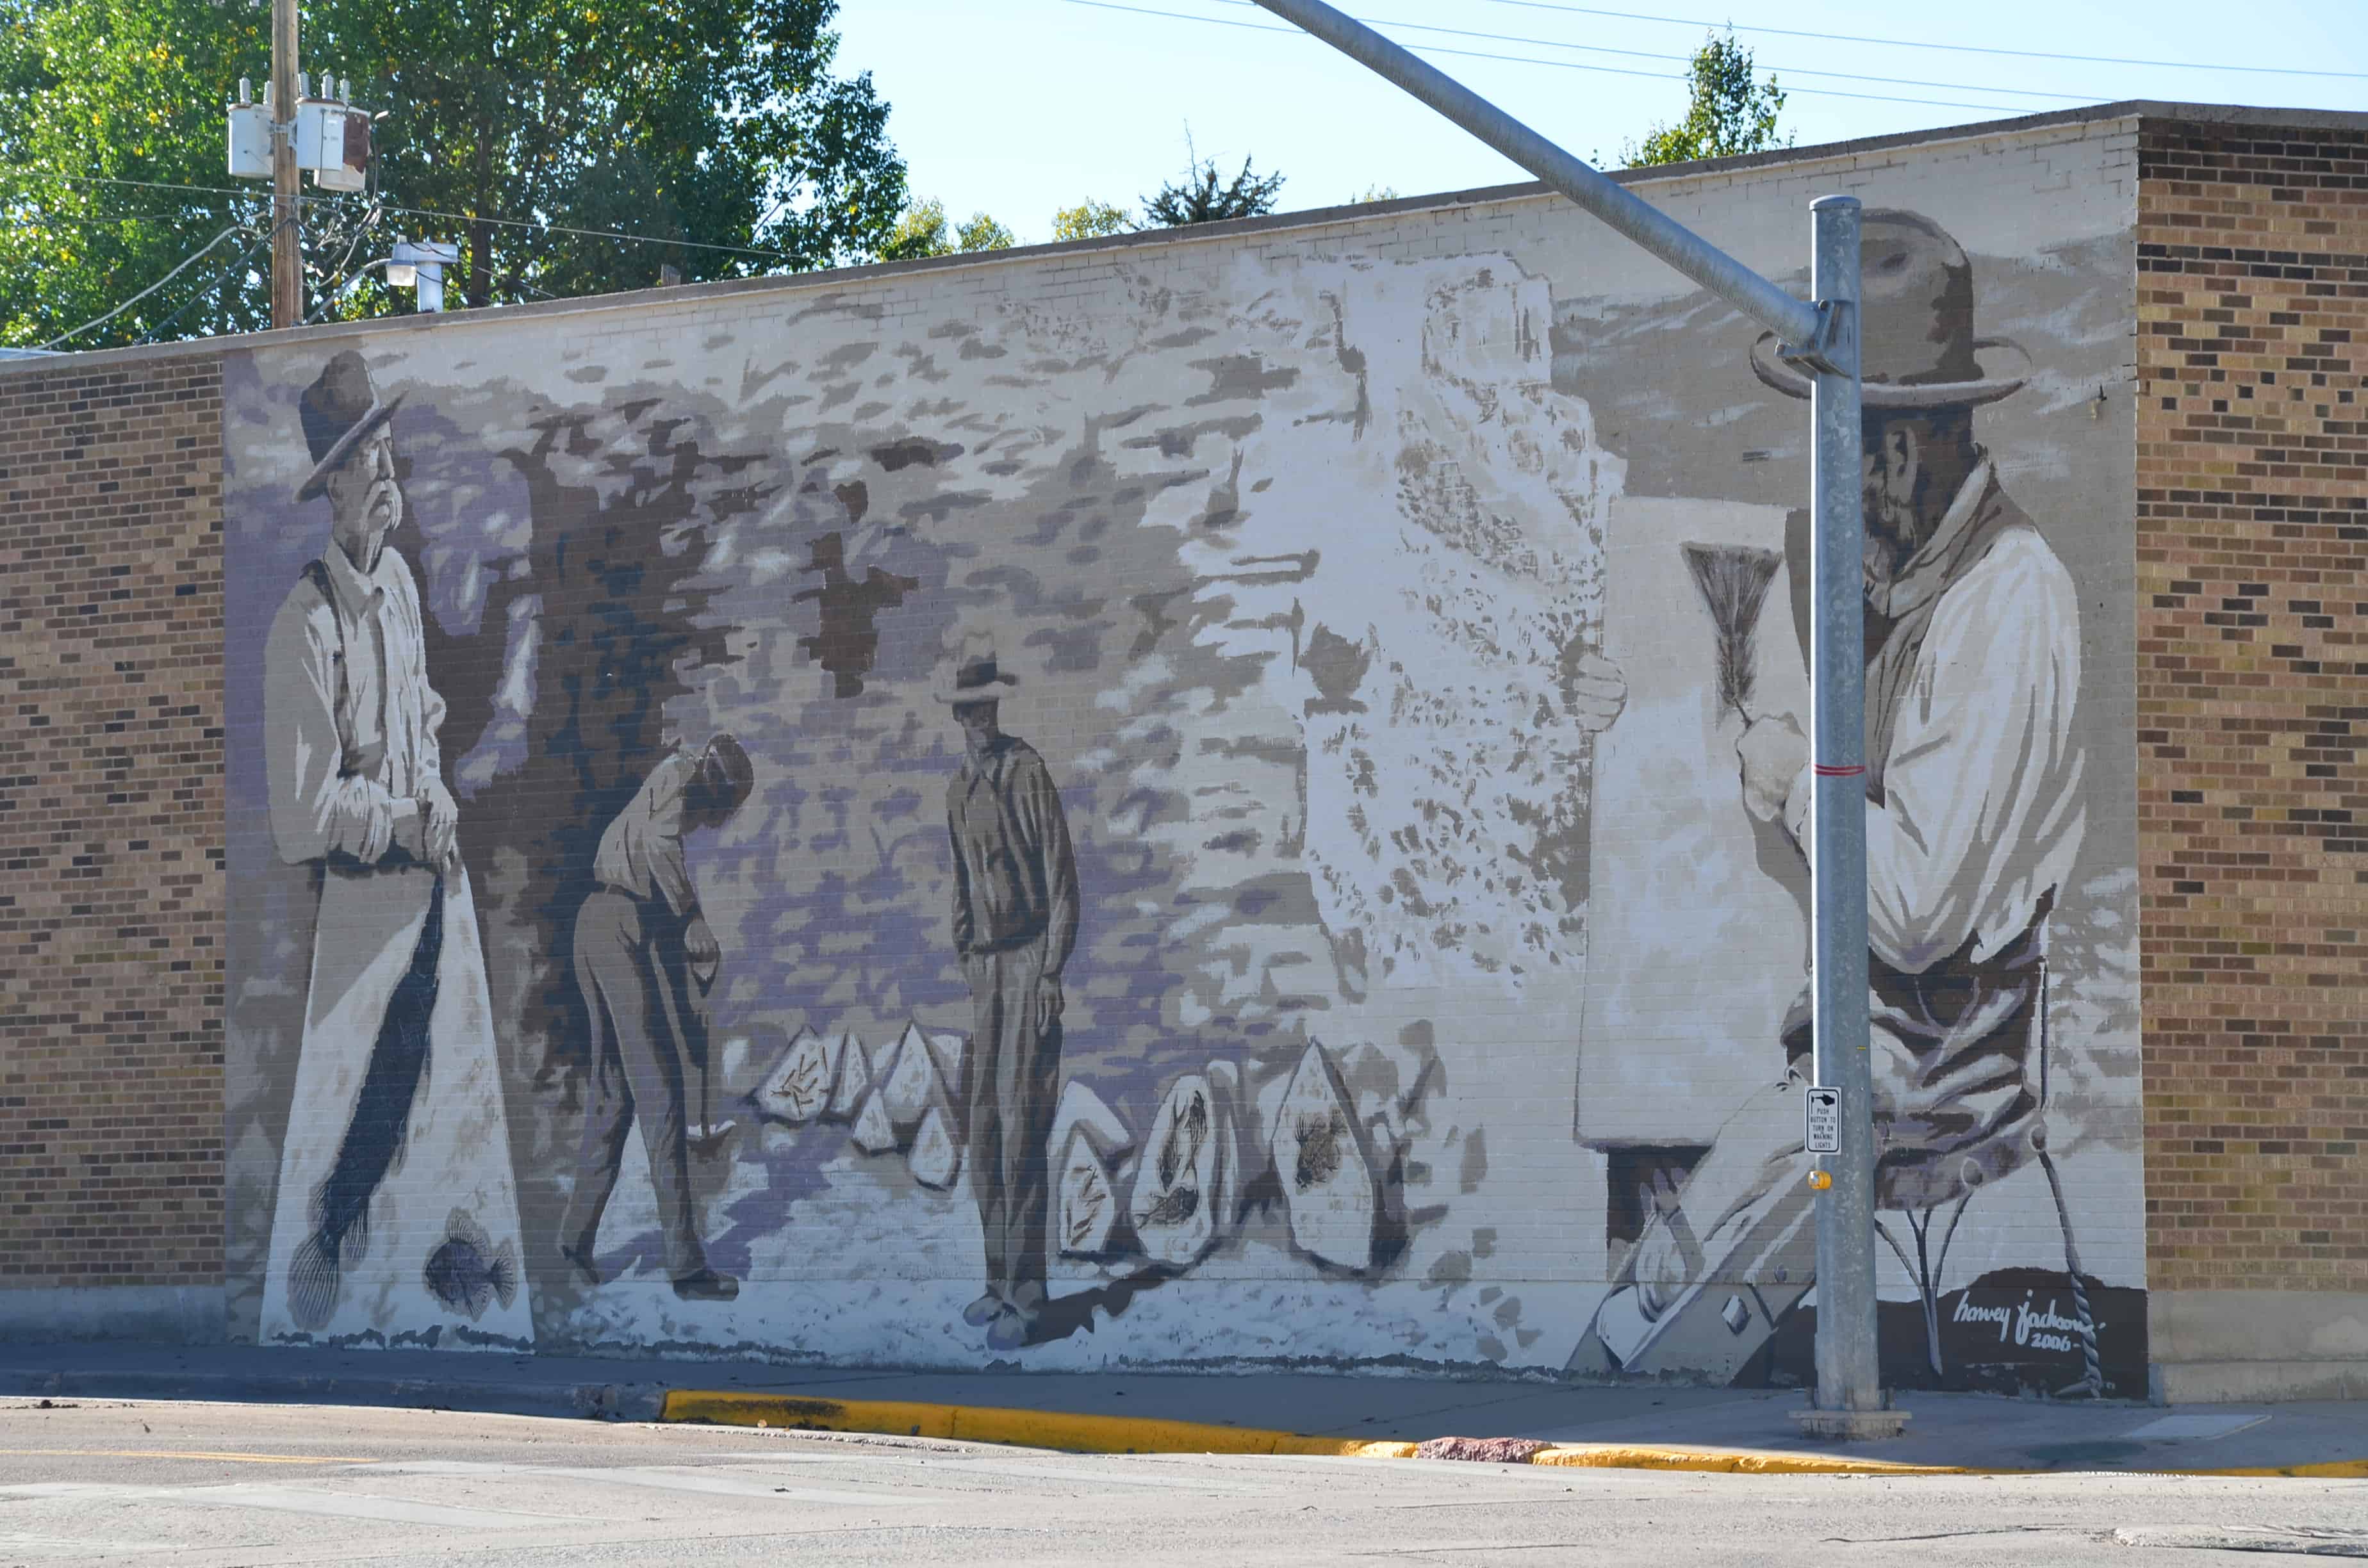 A mural on the square in Kemmerer, Wyoming